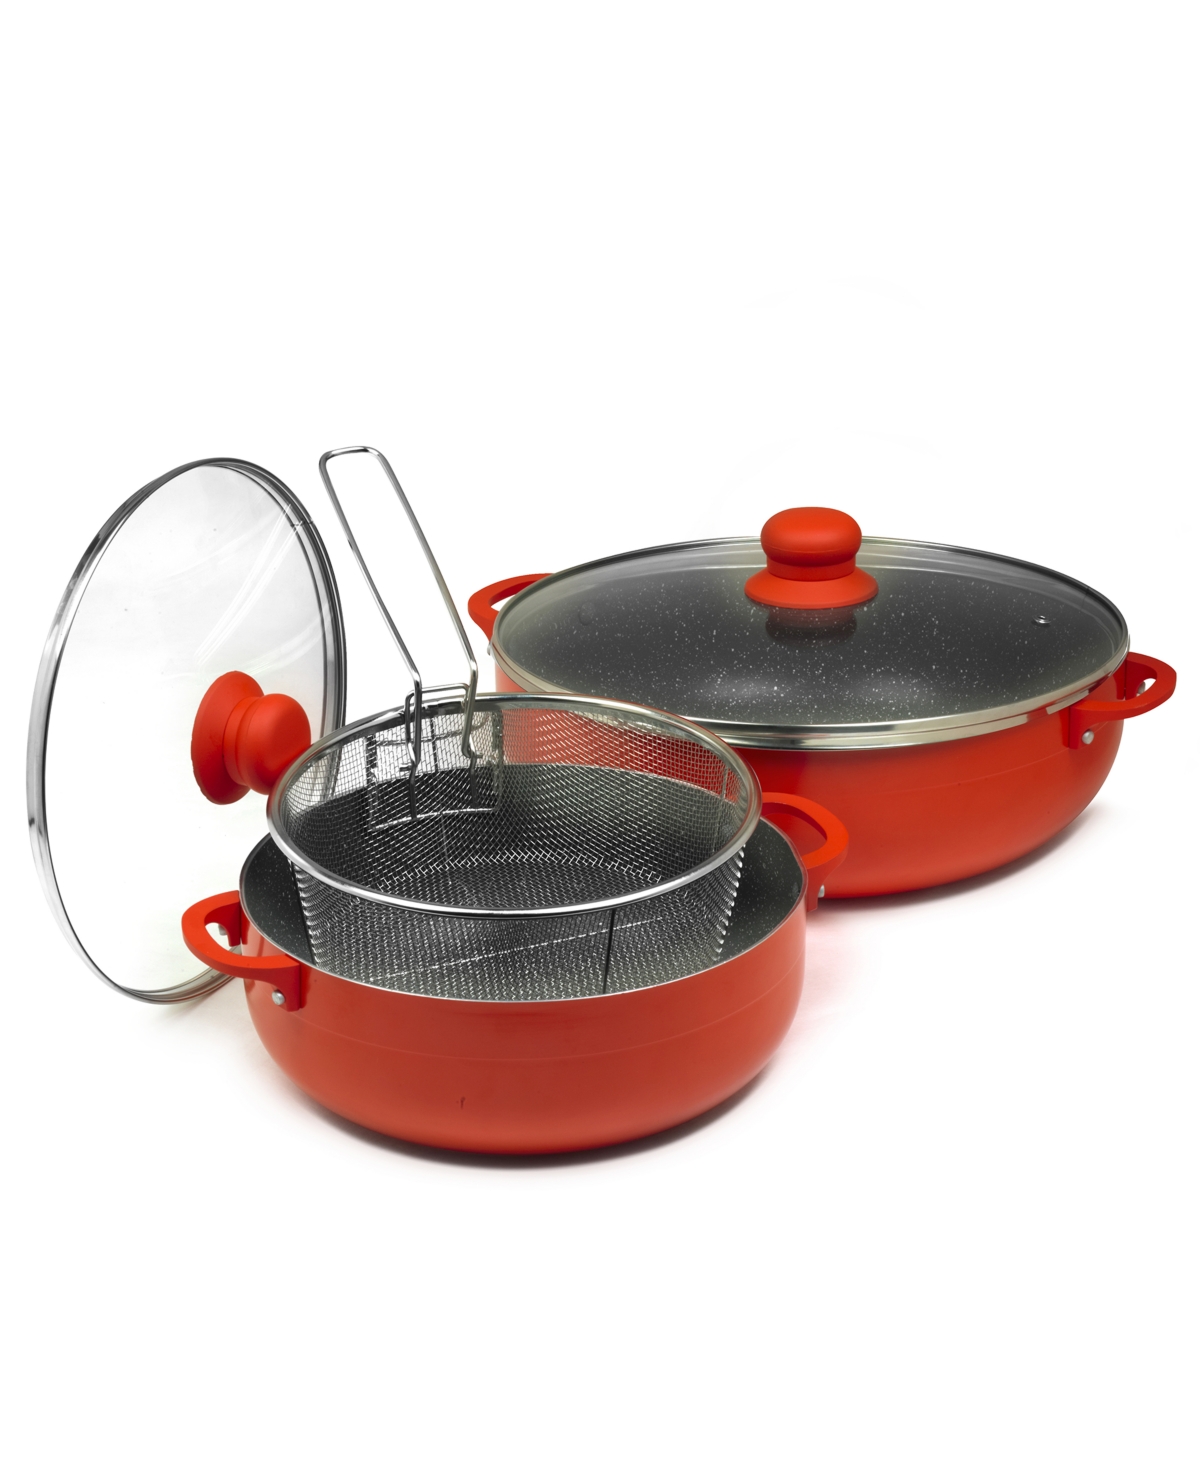 2020 carnival sale on pot sets , local iron pot and ring stove